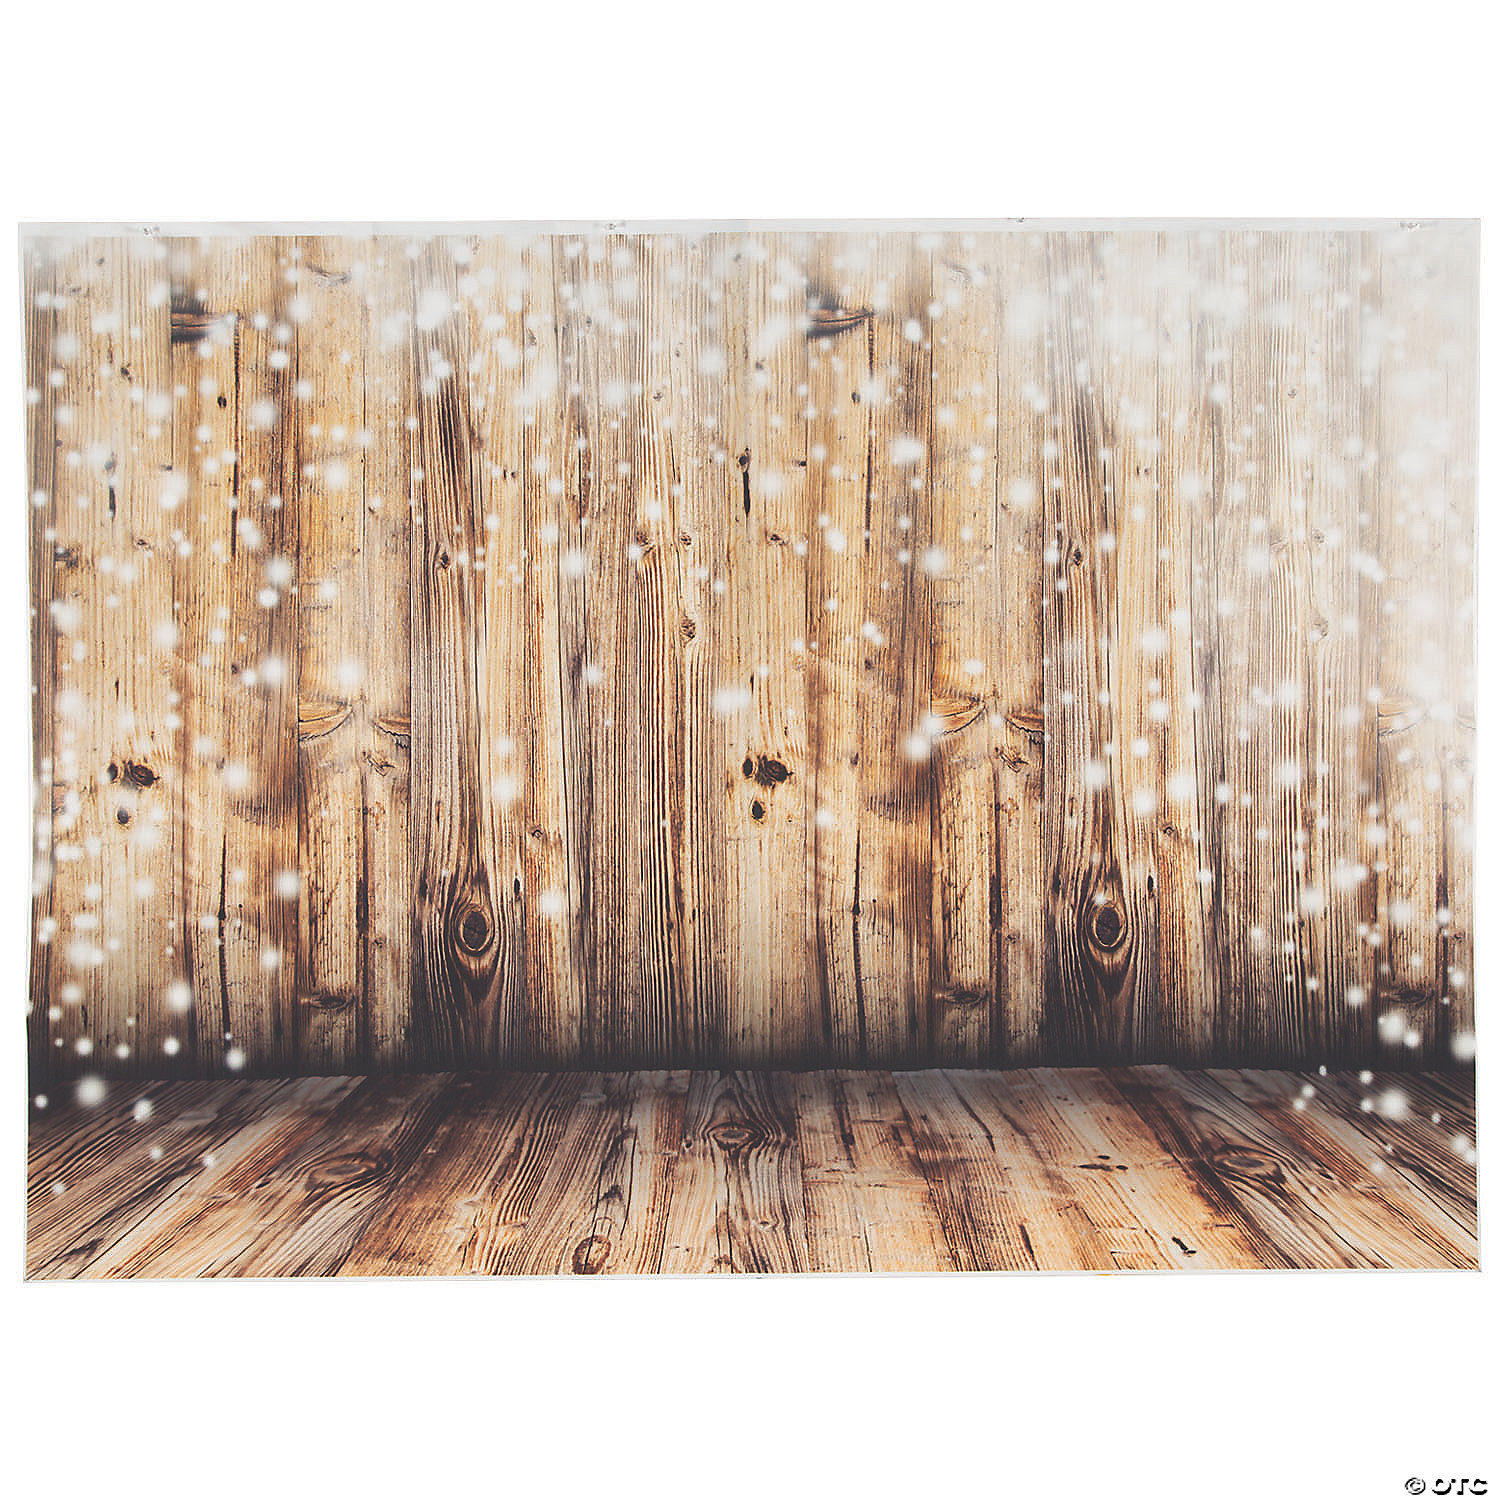 Wood Board Table Christmas Warm Gold Garland Lights Backdrop 8x8ft Vinyl Photography Background Rustic Background Shiny Lights New Year Party Decoration Children Family